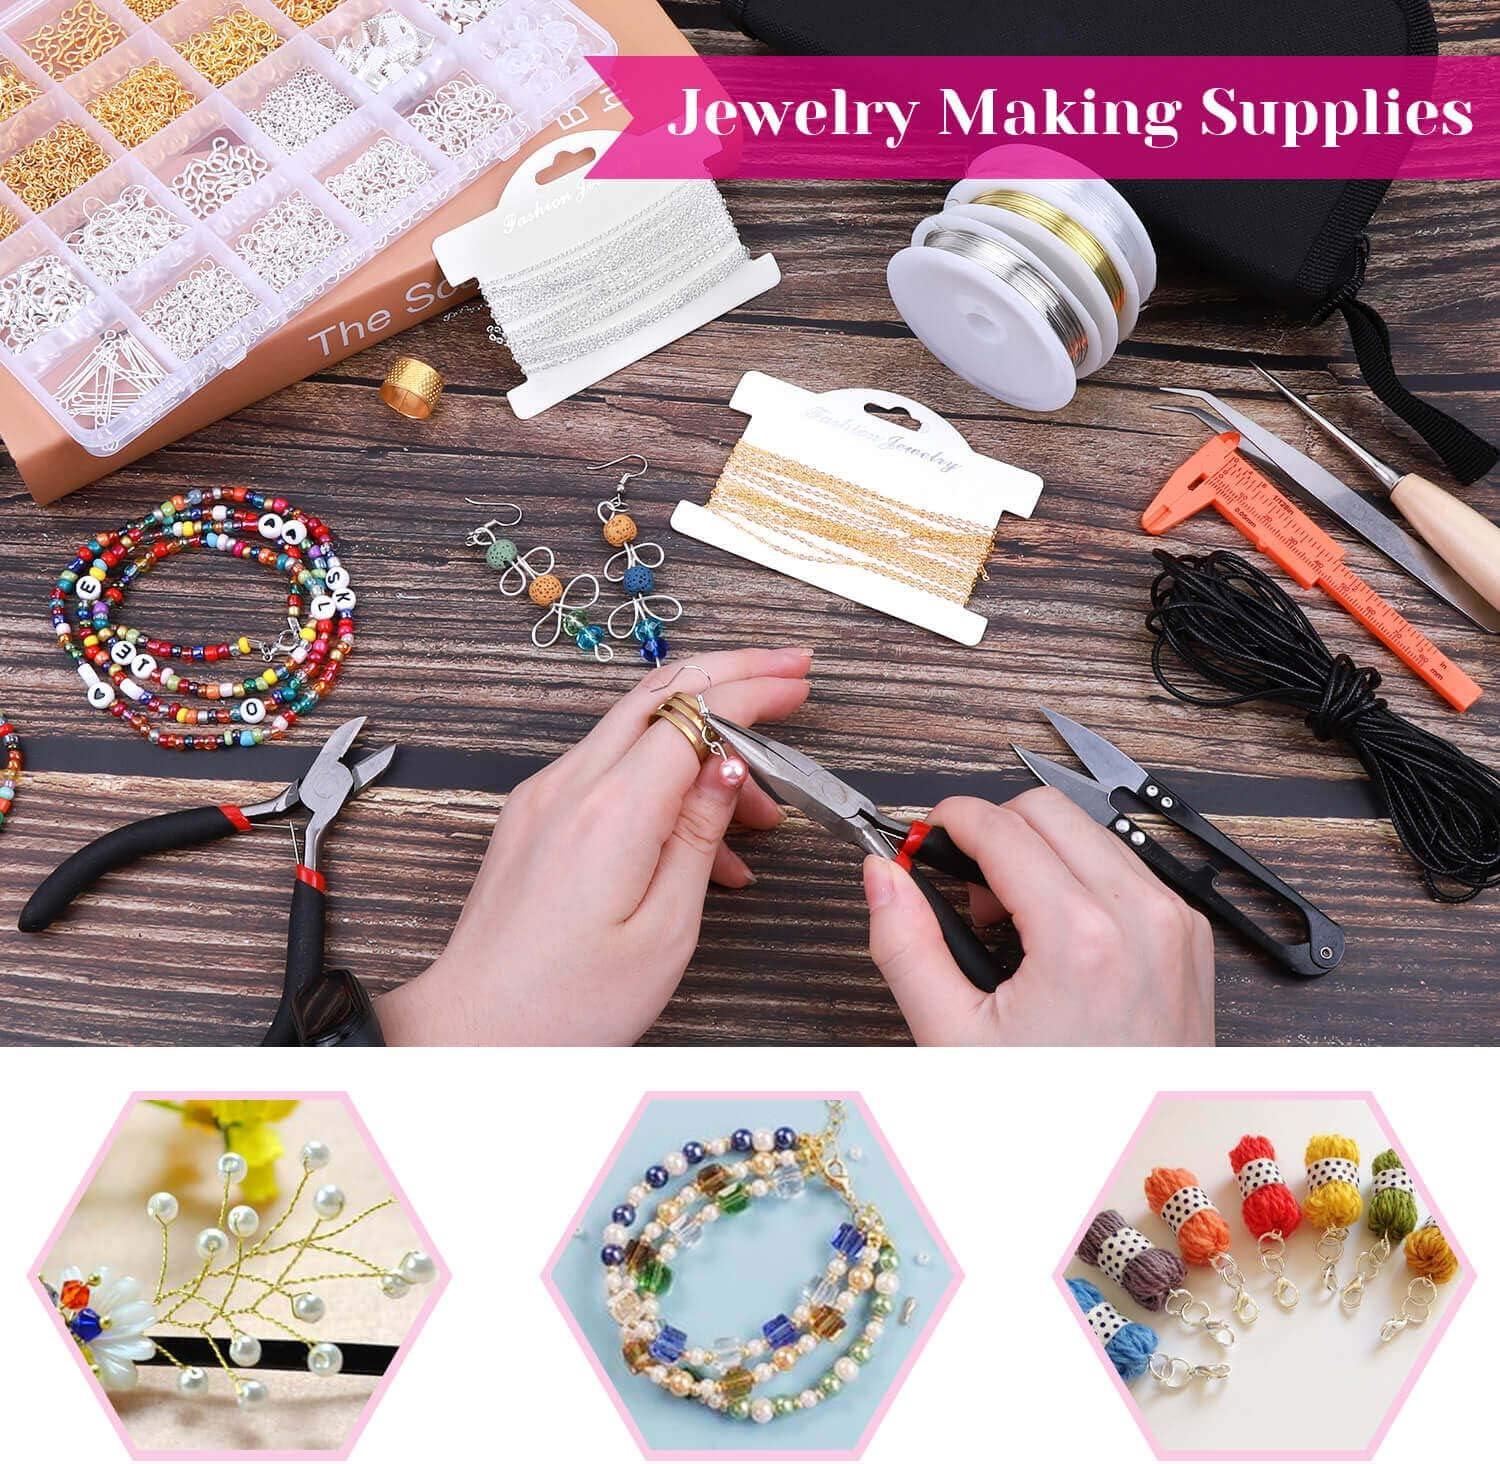 shynek Jewelry Making Kits for Adults, Jewelry Making Supplies Kit with  Jewelry Making Tools, Earring Charms, Jewelry Wires, Jewelry Findings and